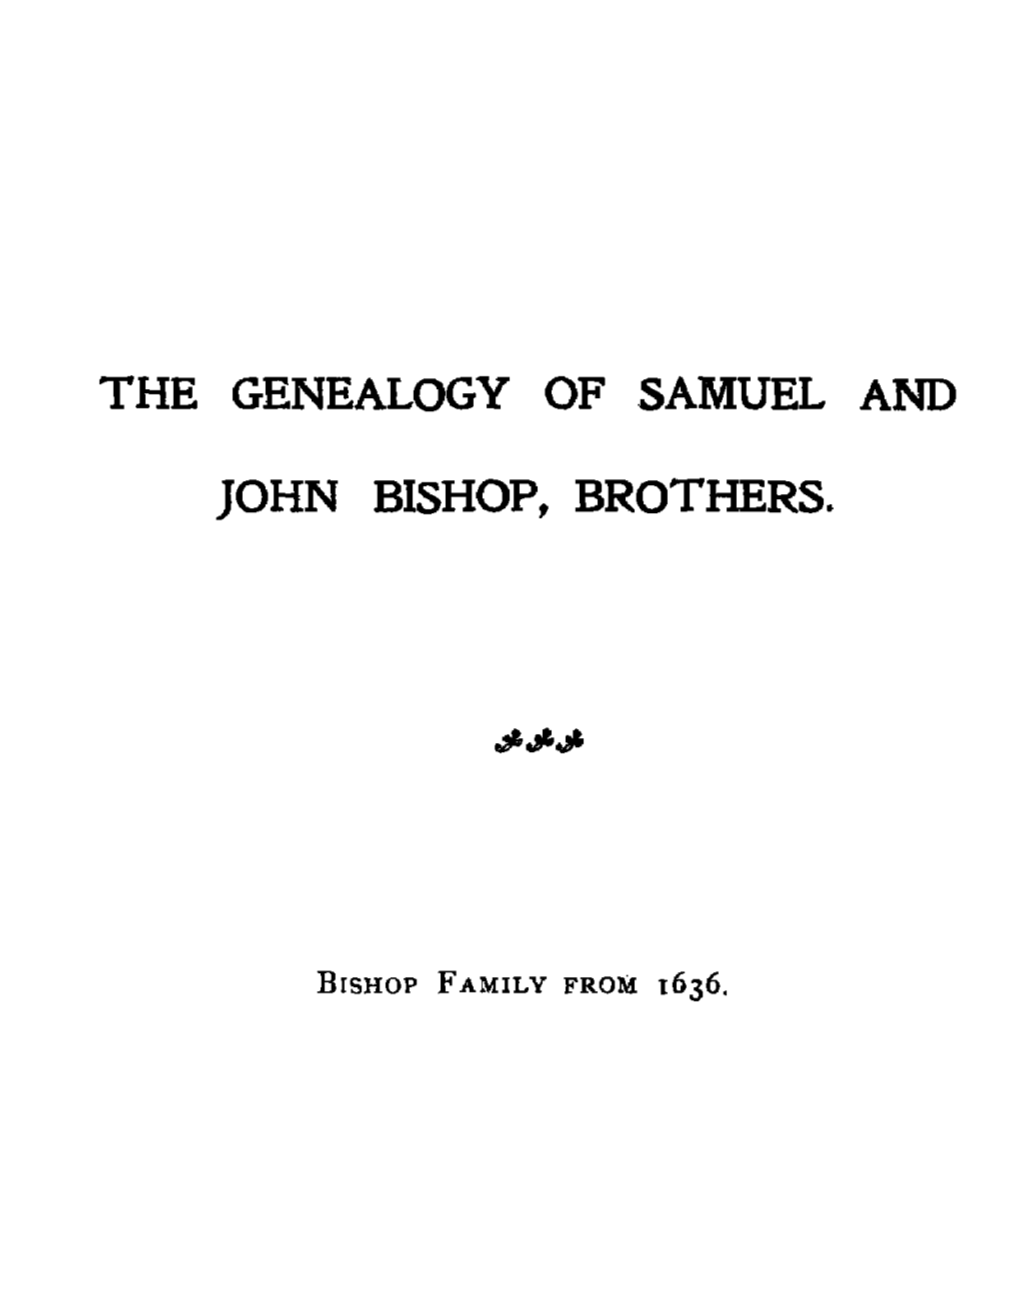 The Genealogy of Samuel and John Bishop, Brothers